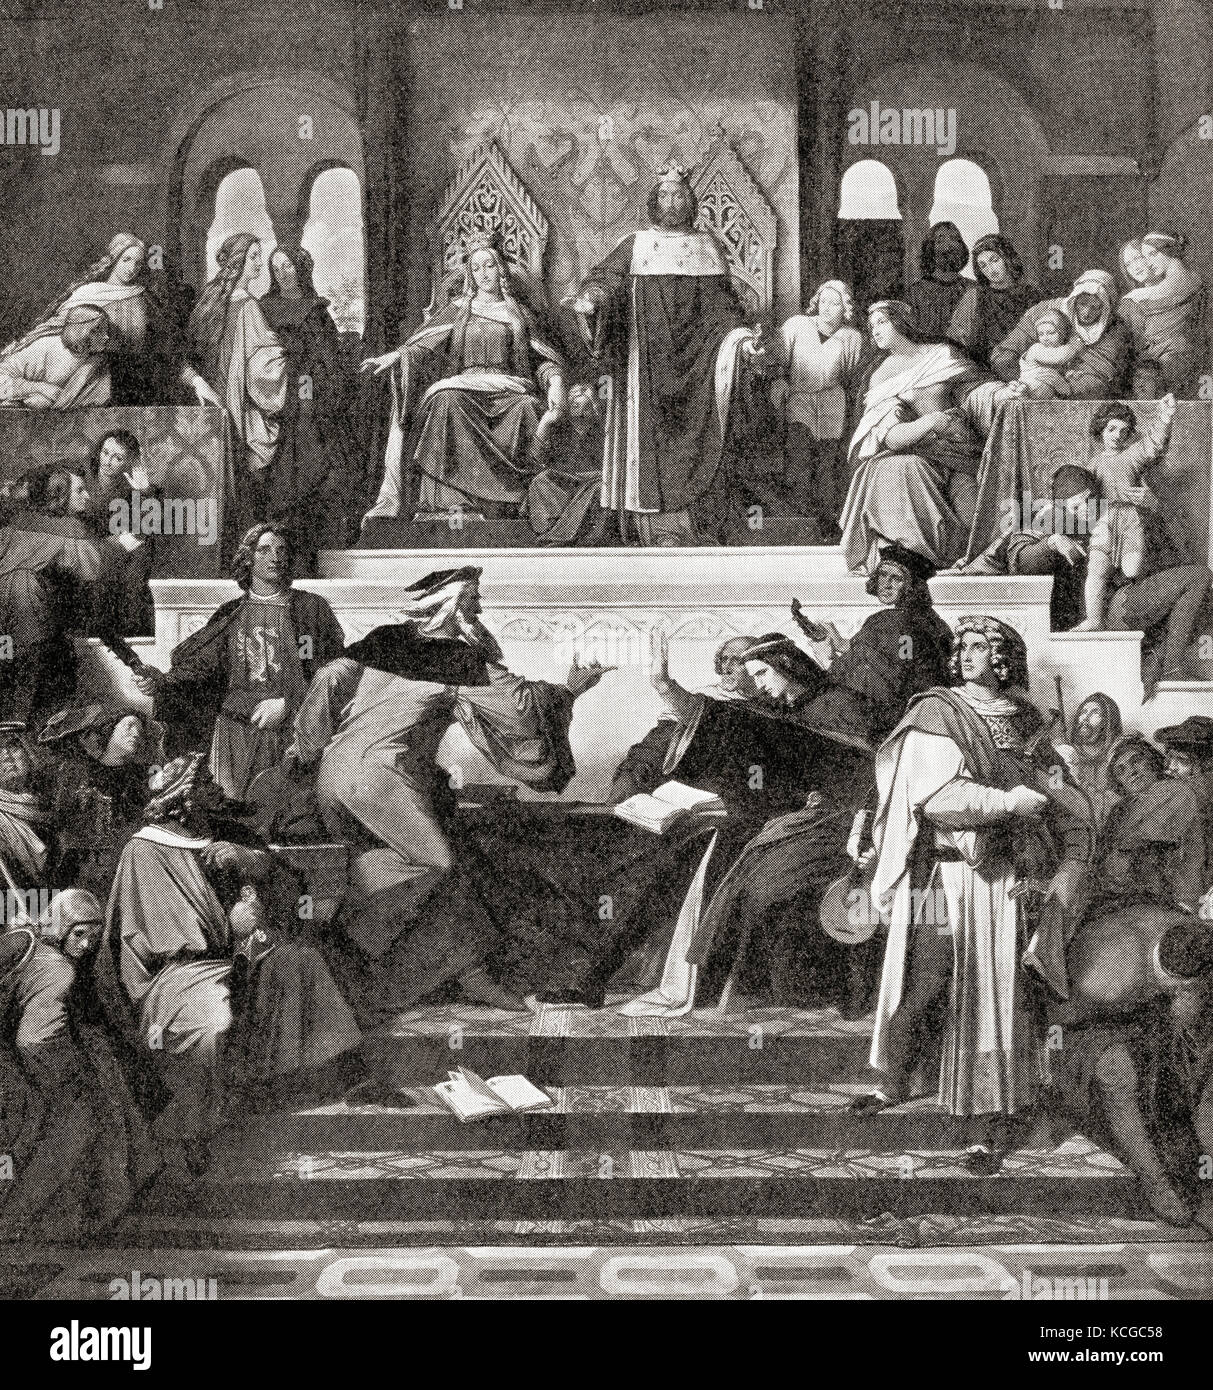 The Minstrels' Contest or Sängerkrieg, at Wartburg Castle, Germany in 1207.  From Hutchinson's History of the Nations, published 1915. Stock Photo